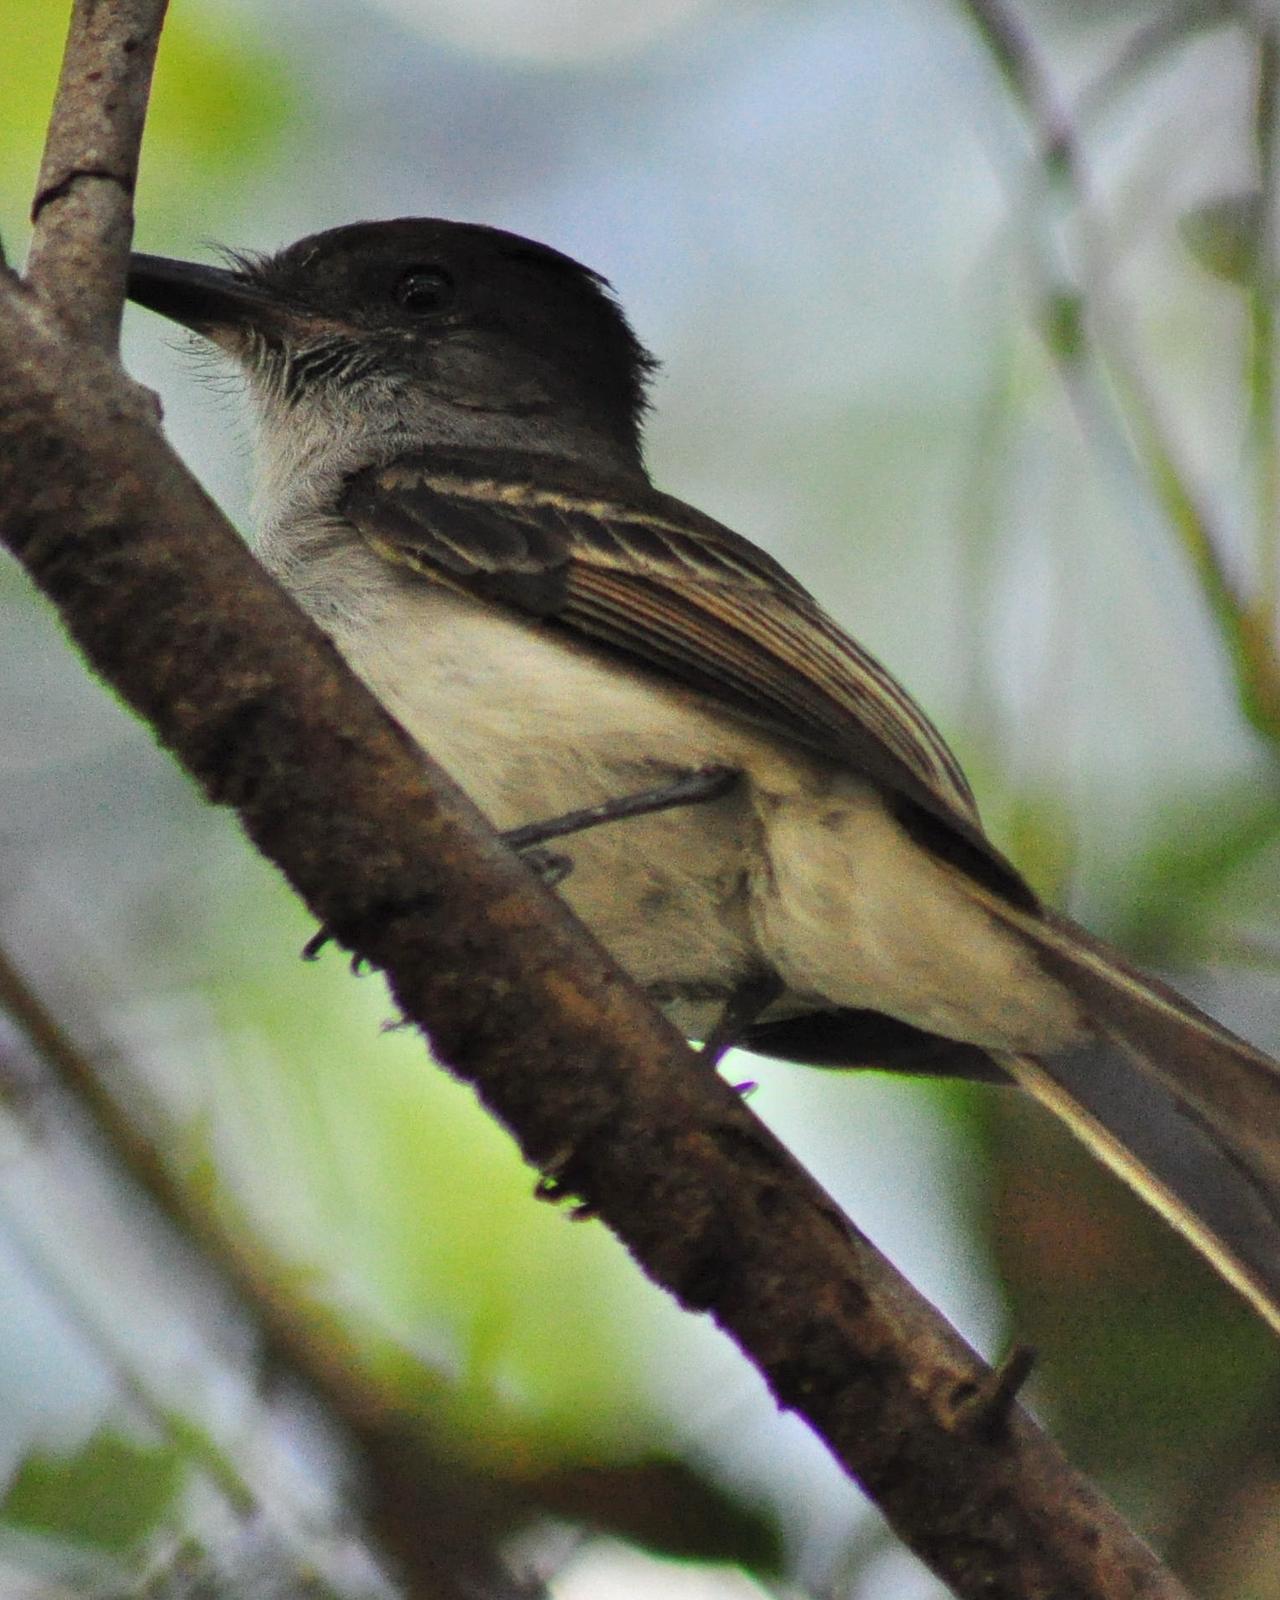 Puerto Rican Flycatcher Photo by Kyle Kittelberger